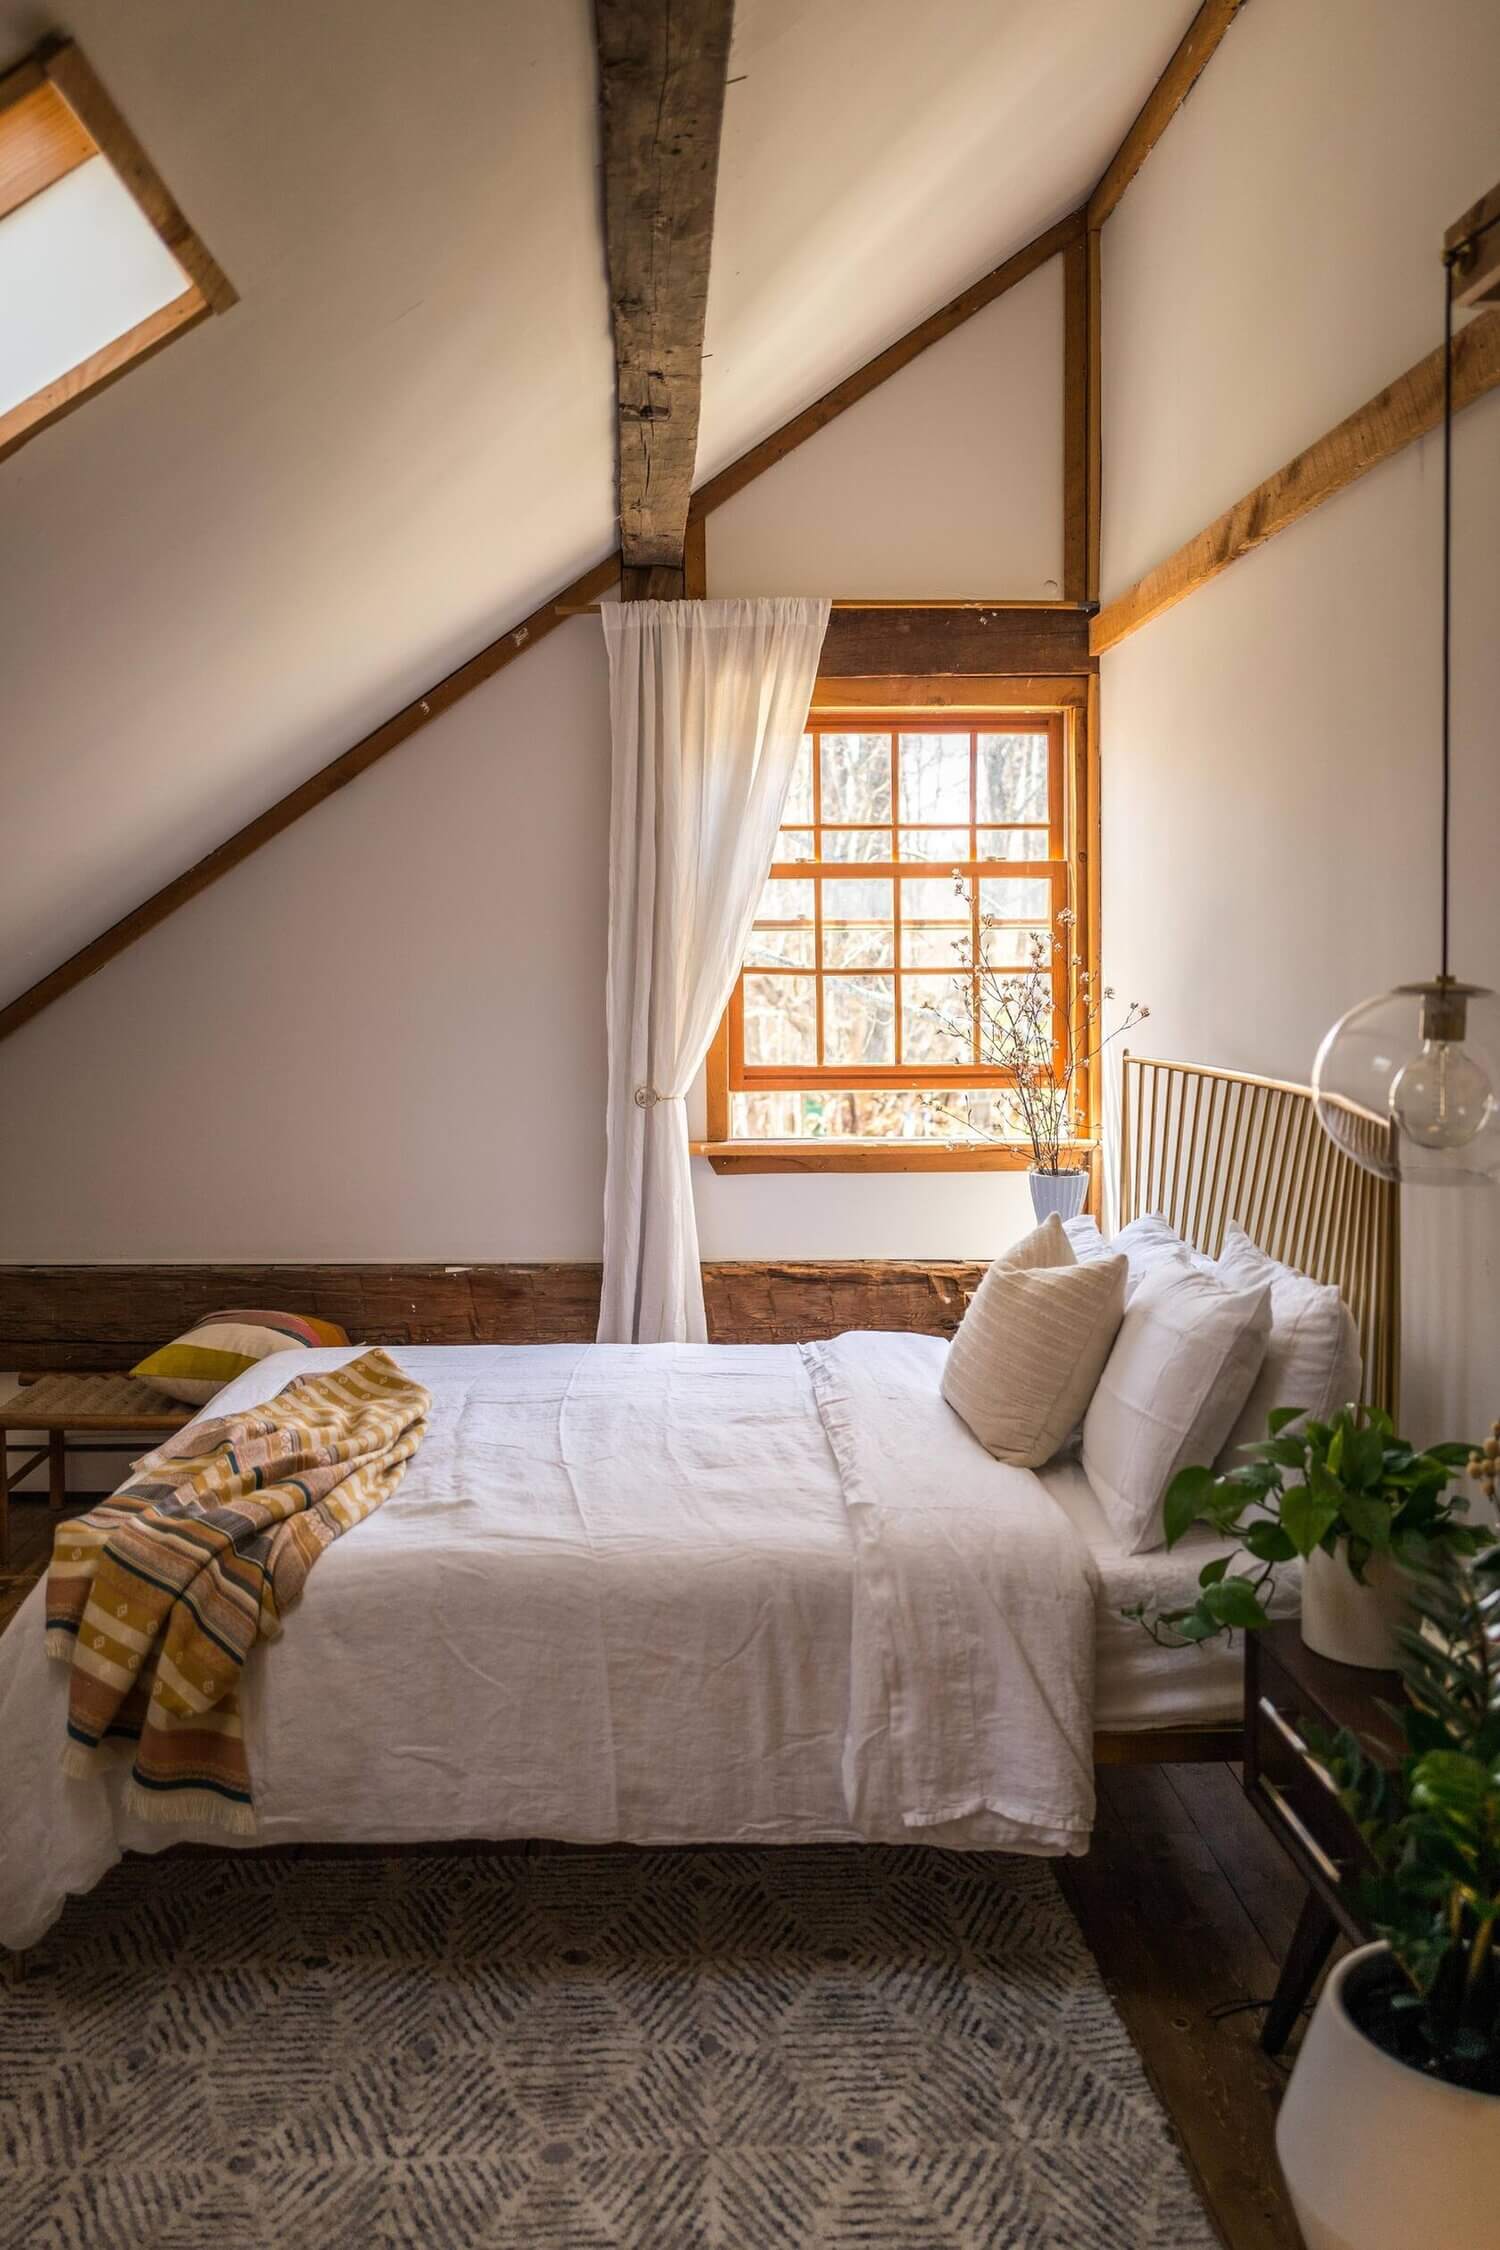 the hunter barnhouse airbnb nordroom23 The Hunter Barnhouse: A Stylish Slow Living Airbnb Surrounded by Nature